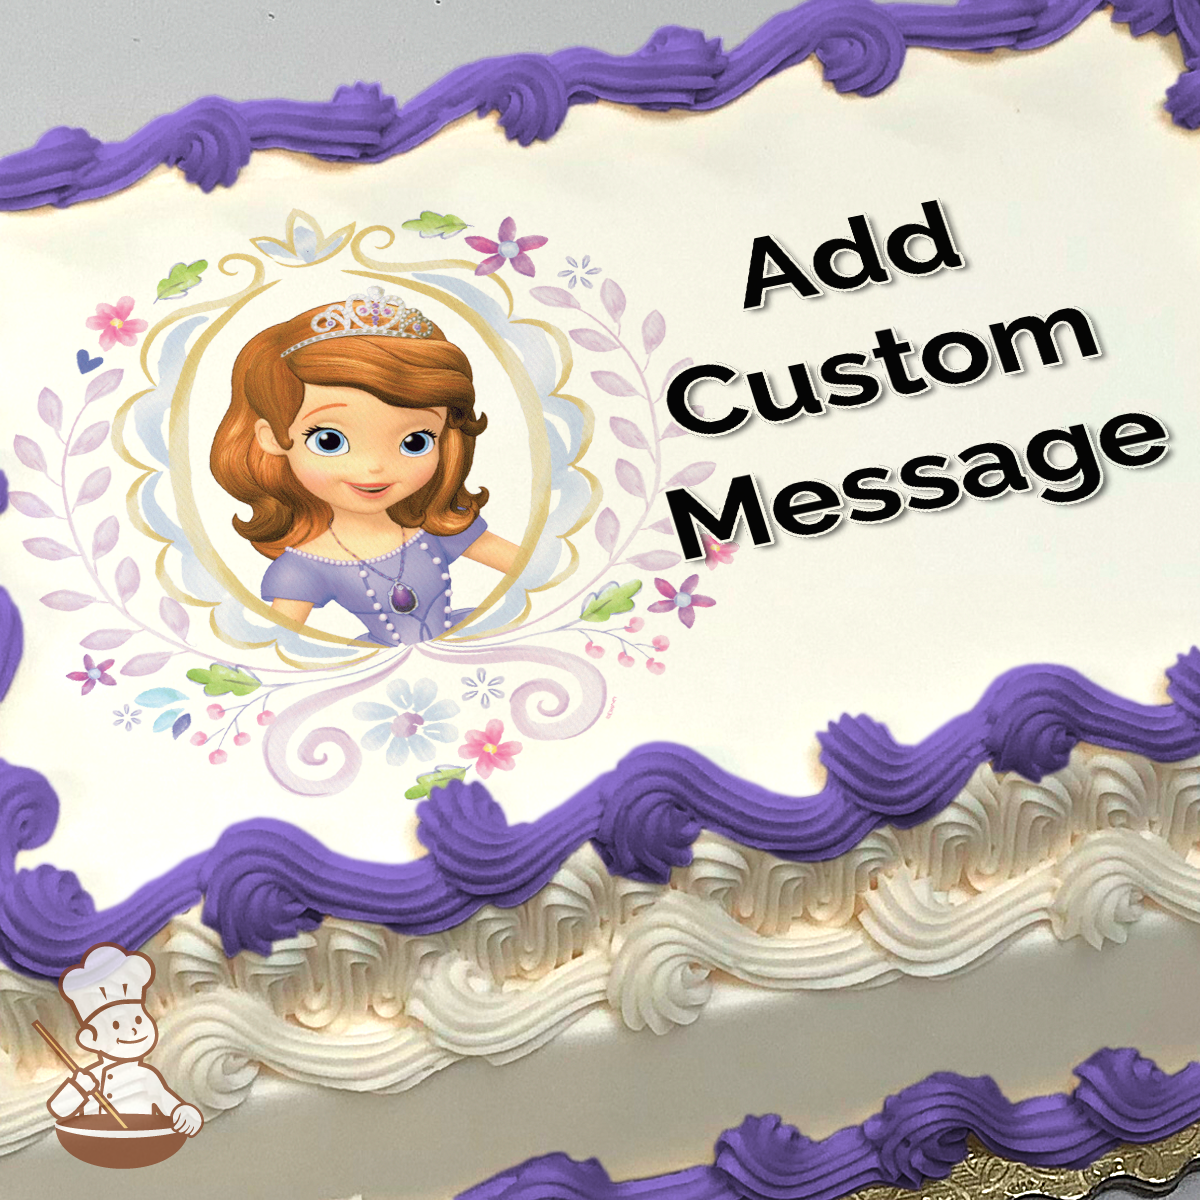 Amazon.com: Cake Topper for Sofia the First Birthday Party, Cake Decoration  for Sofia the First Party, Princess Sofia Birthday Party, Cupcake Toppers :  Handmade Products